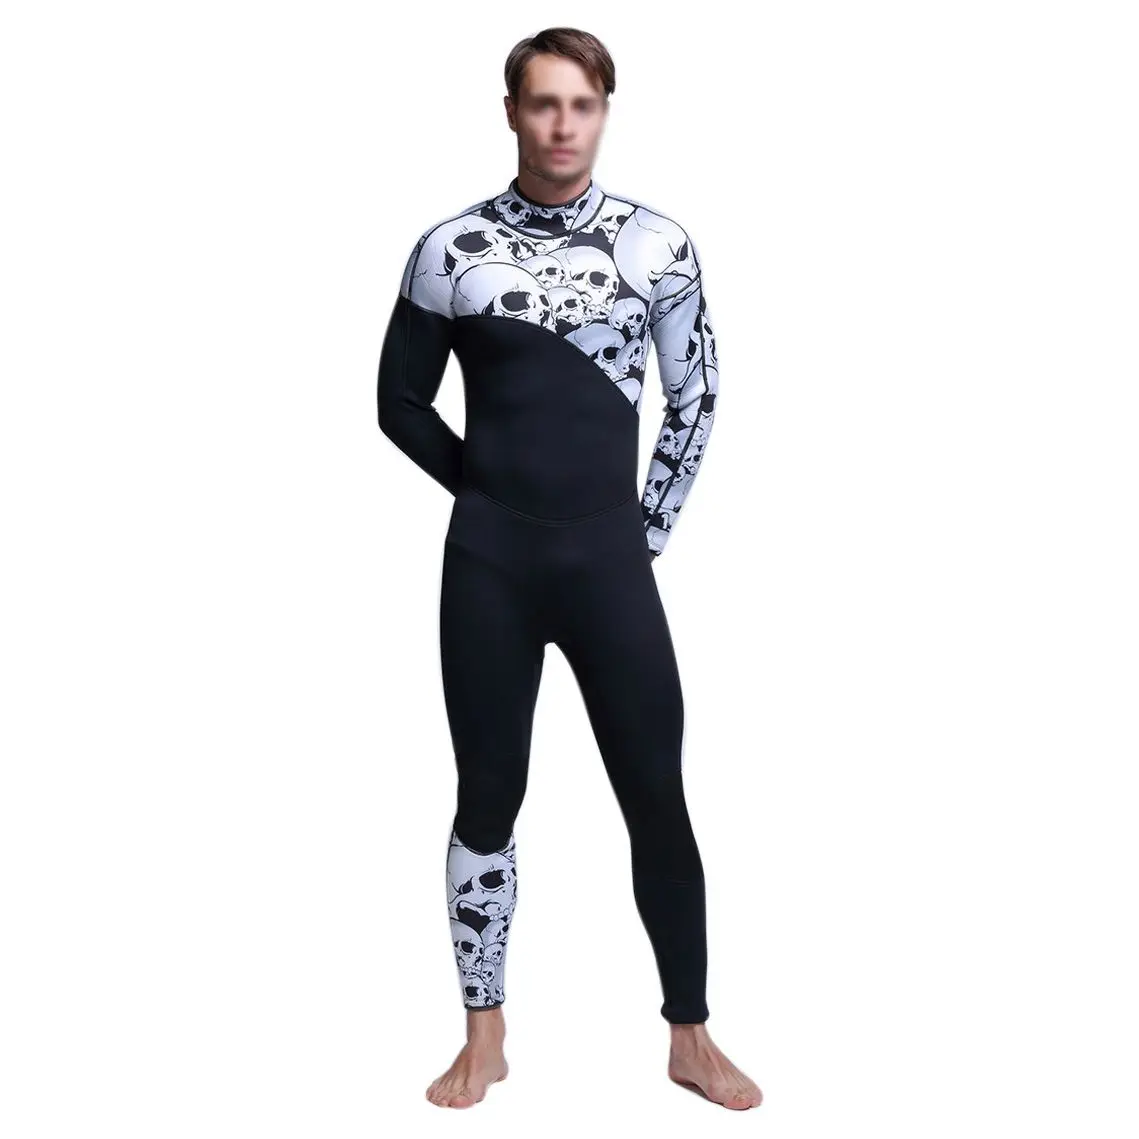 Man Siamese Diving Suit Long sleeved Surf Wear Personalized Wetsuit Male Free Diving Suit - Цвет: Multi